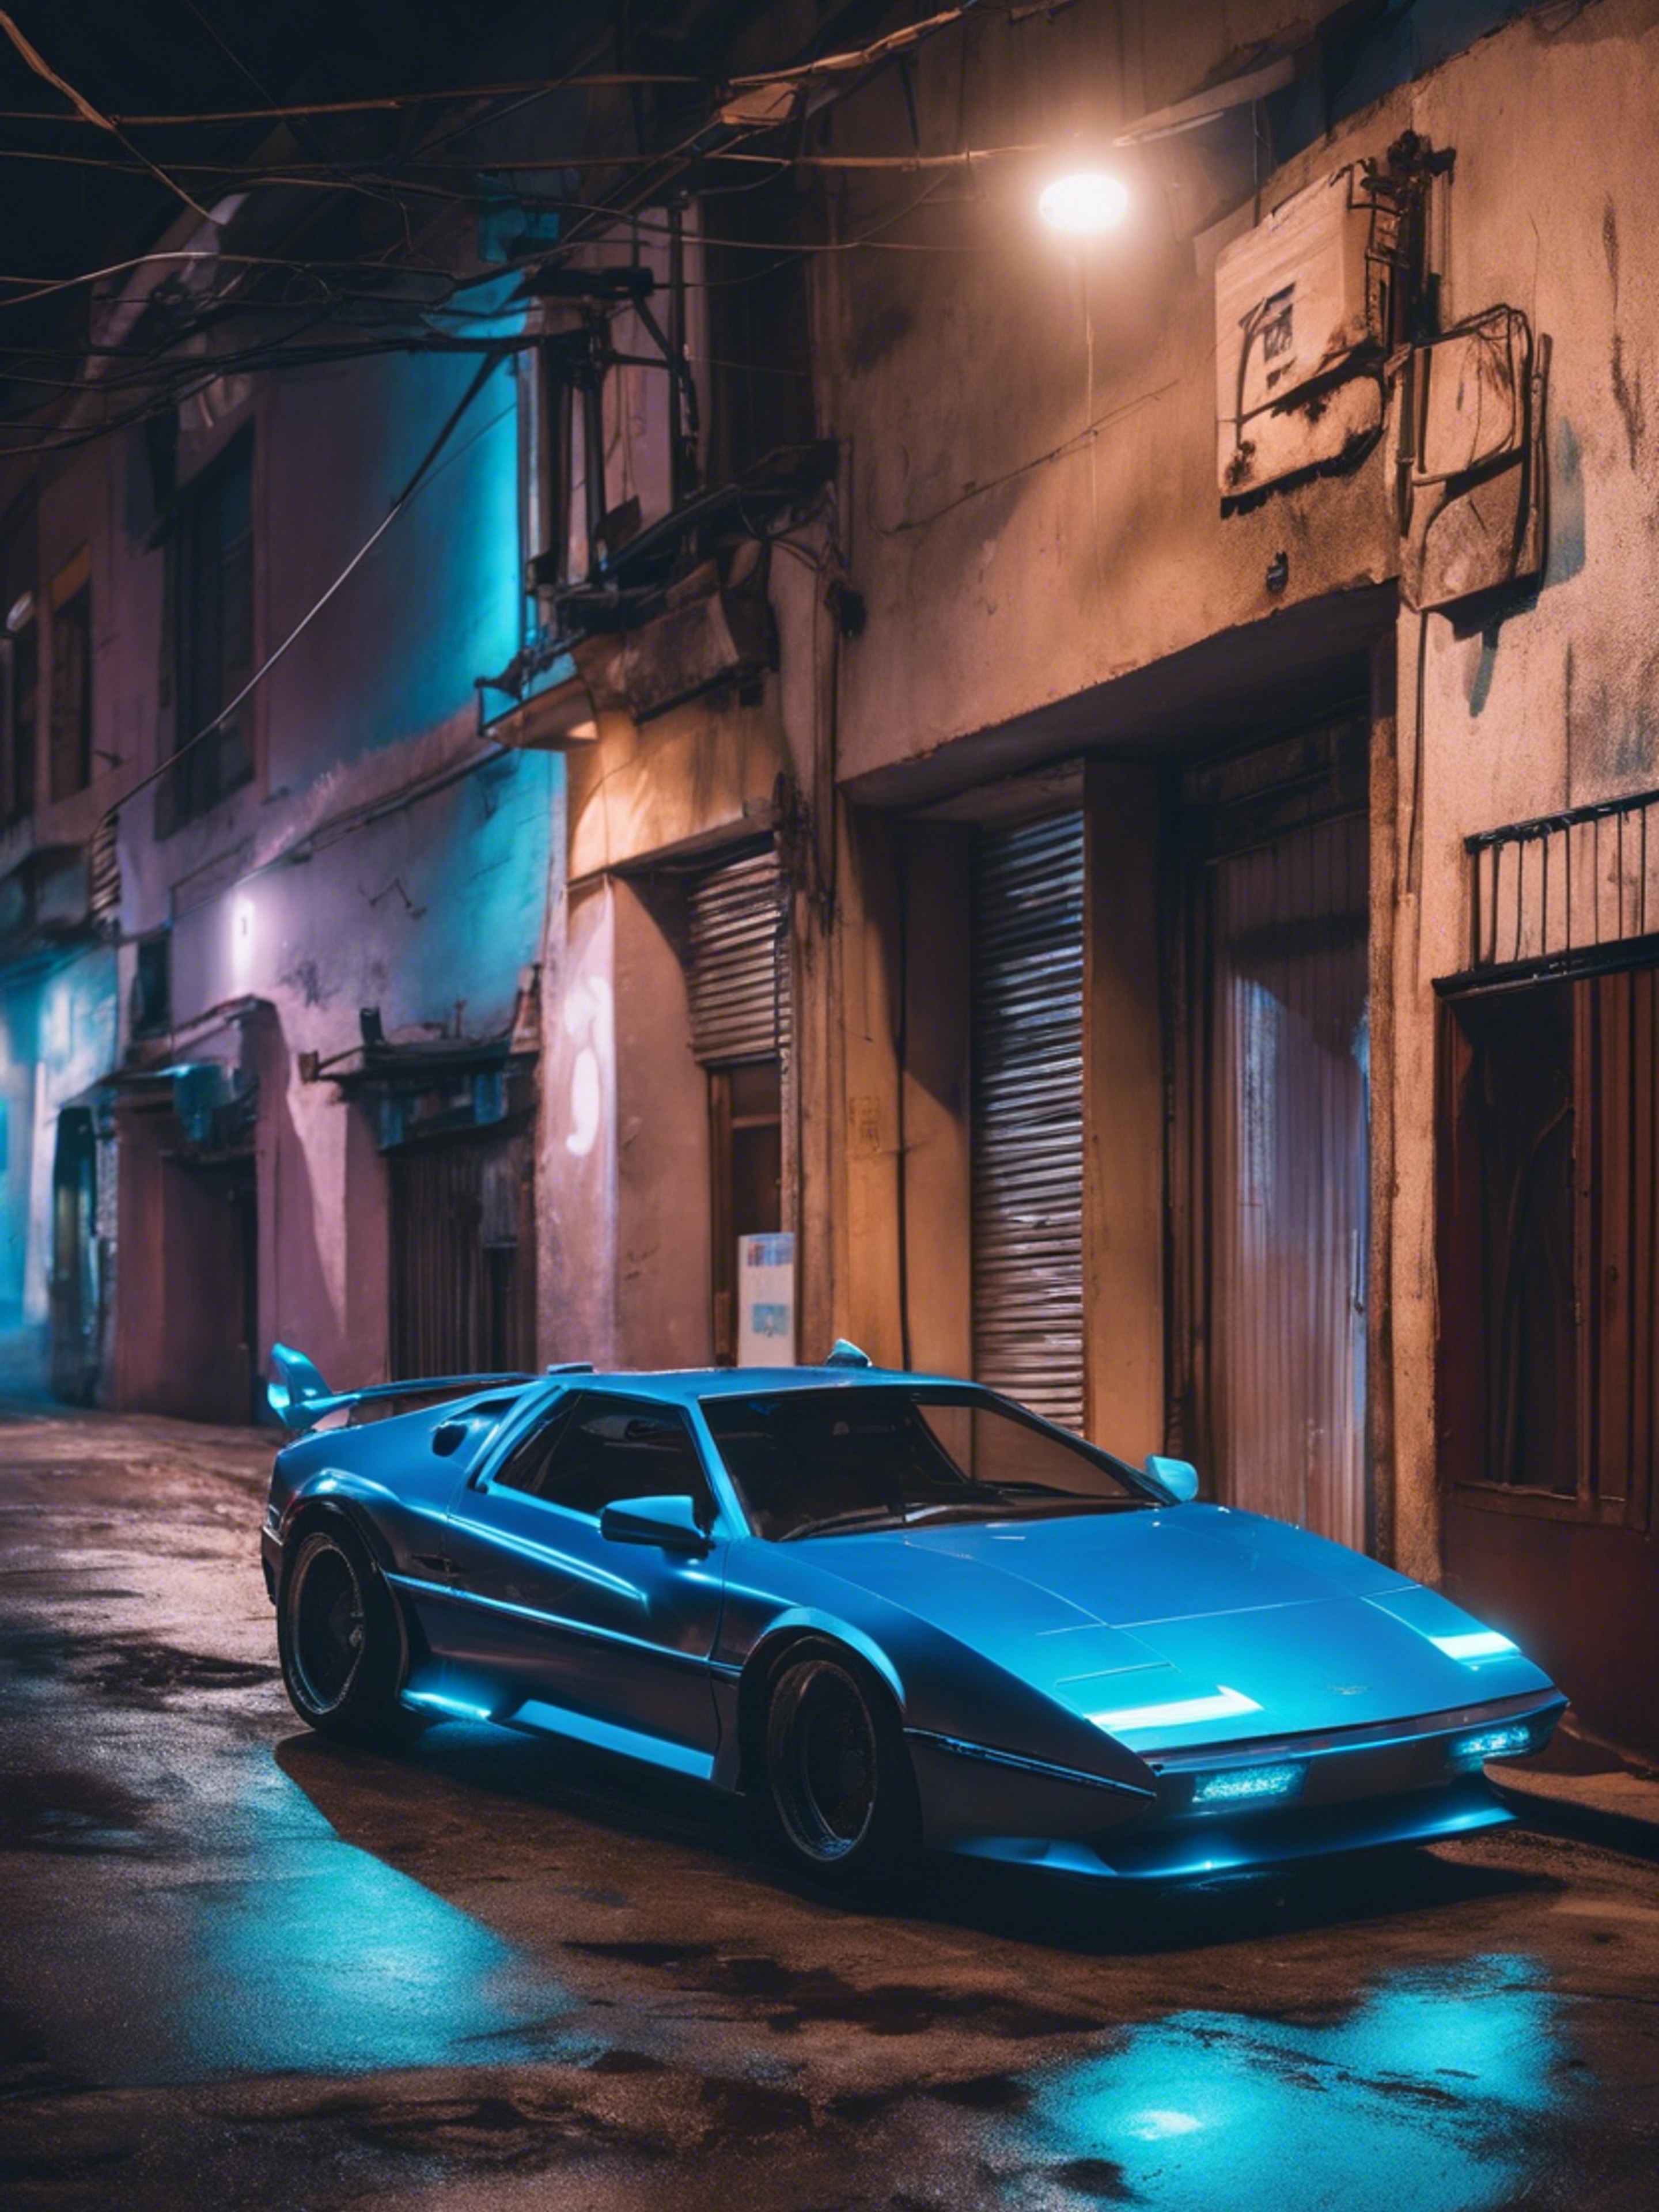 A cyberpunk themed sports car glowing with neon blue underlights parked in a dim alley.壁紙[b442527eec5a4d00a6f1]